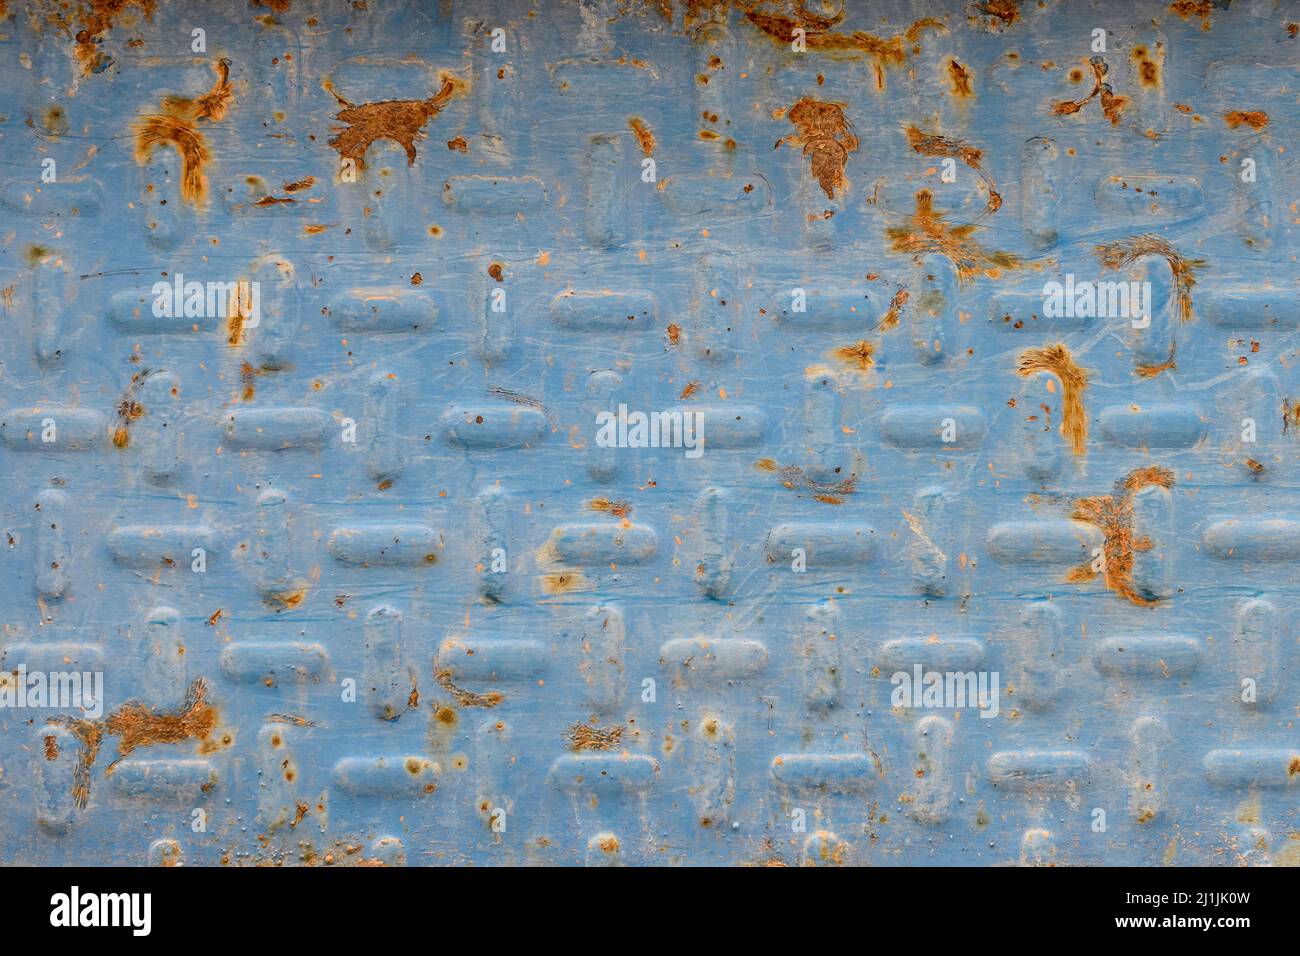 Rusty metal background with traces of gray paint. Stock Photo